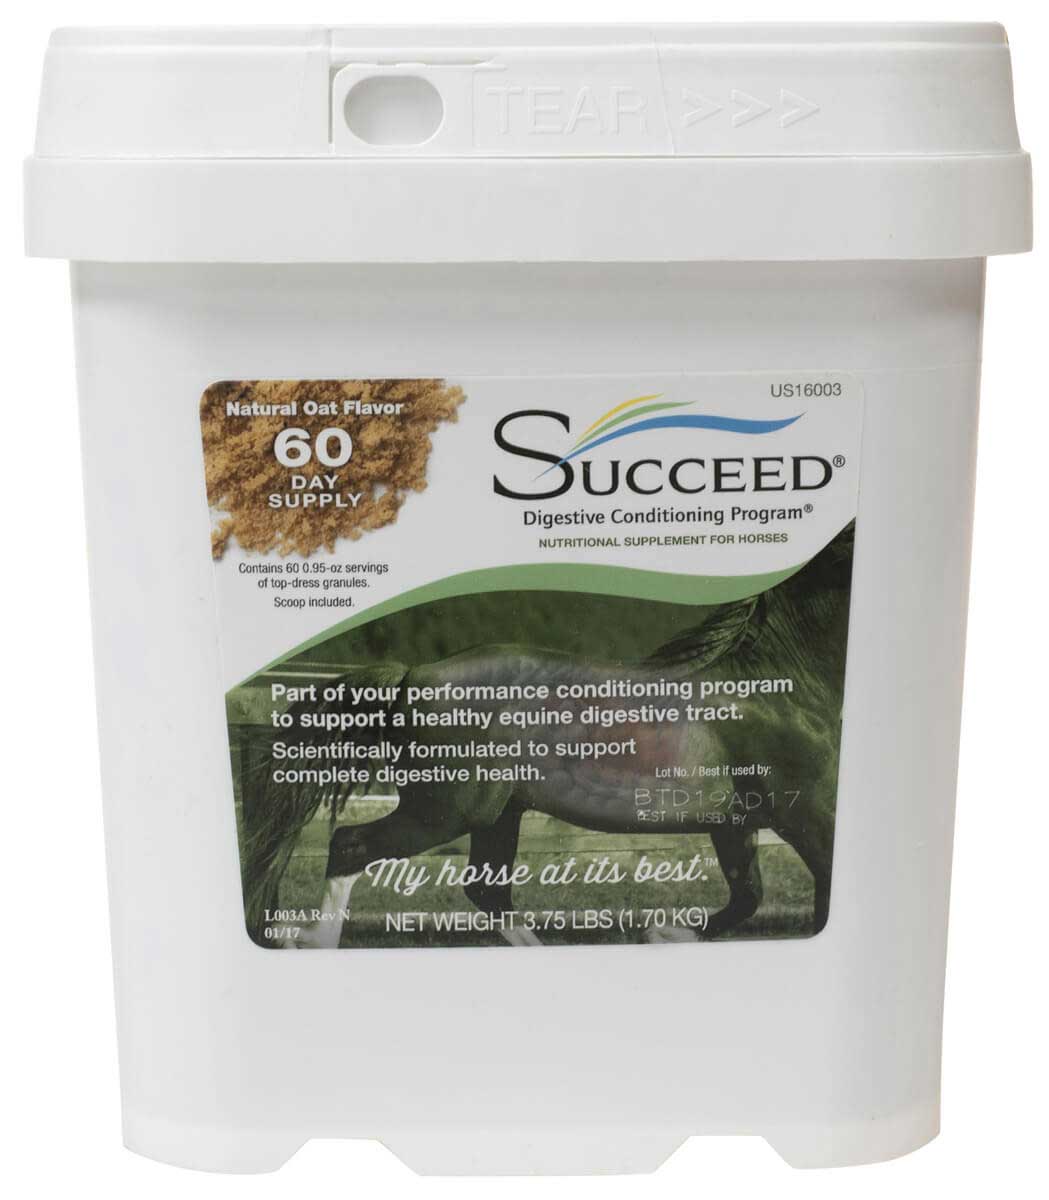 Succeed Digestive Conditioning Supplement for Horses